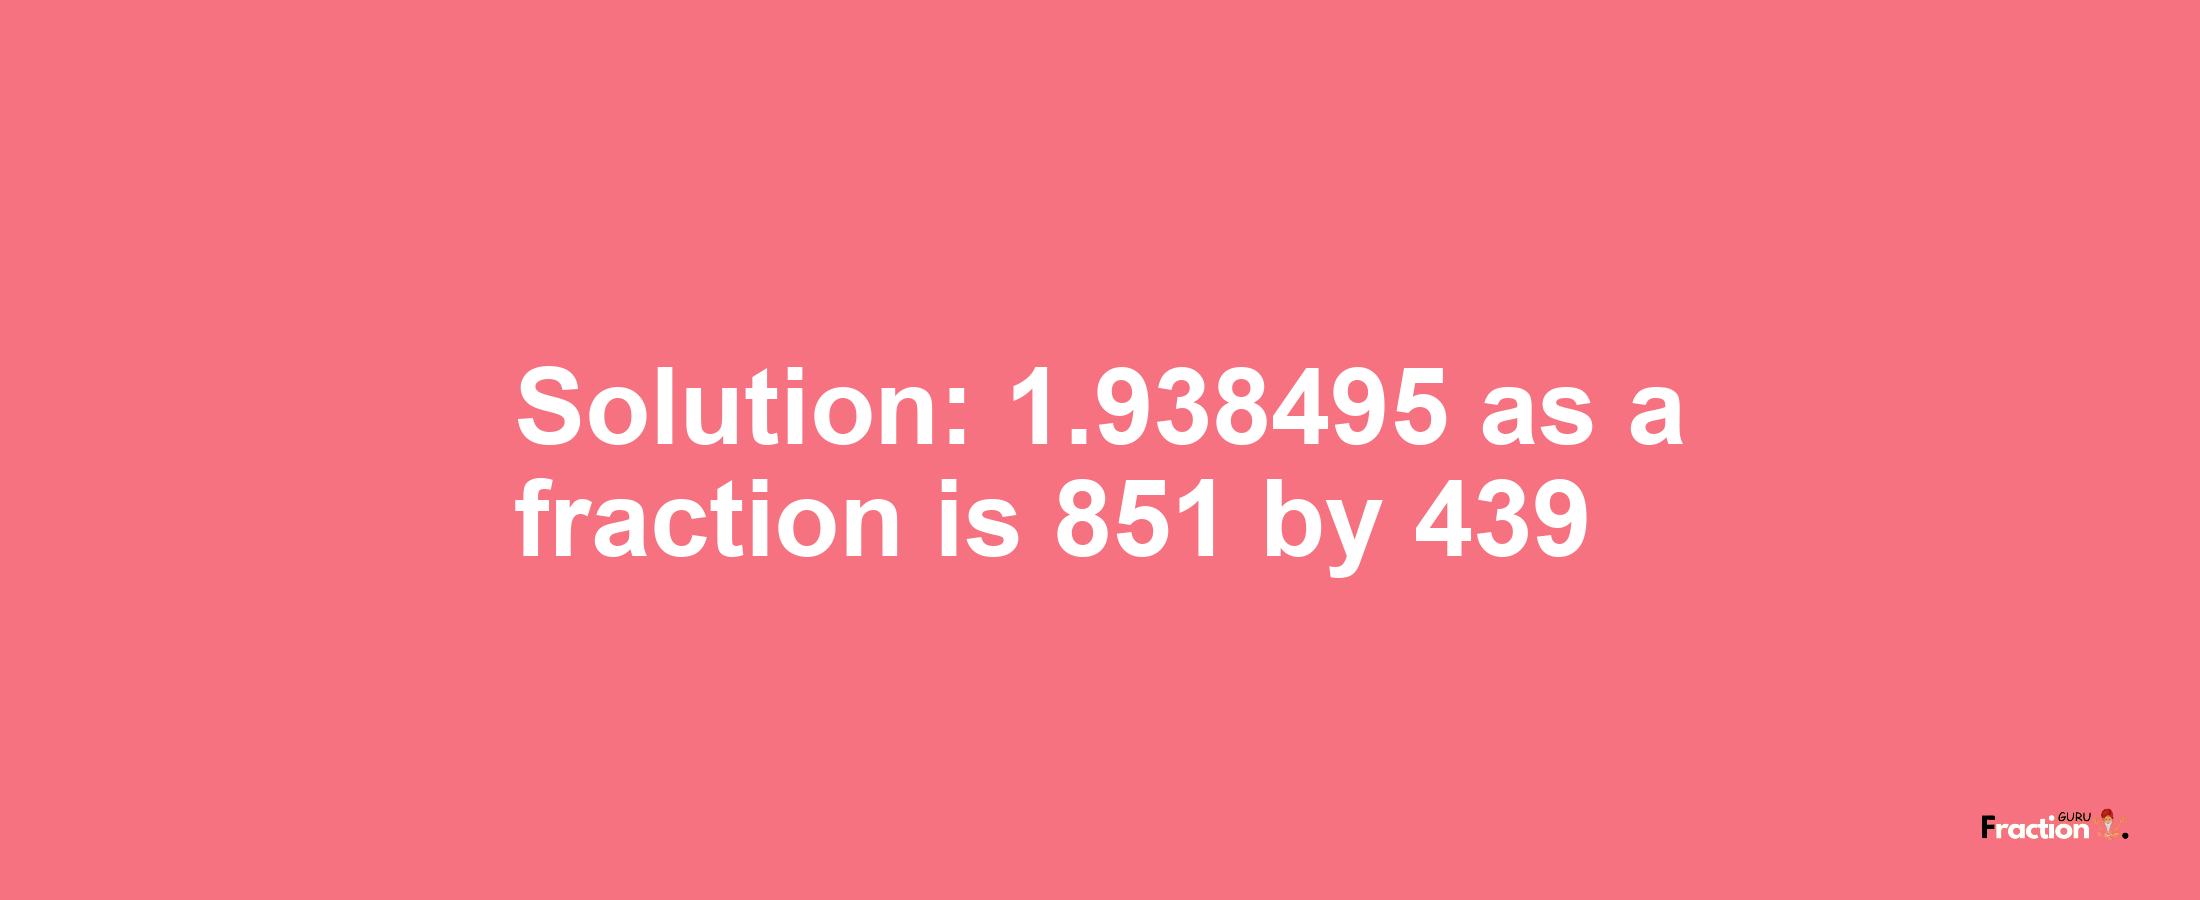 Solution:1.938495 as a fraction is 851/439